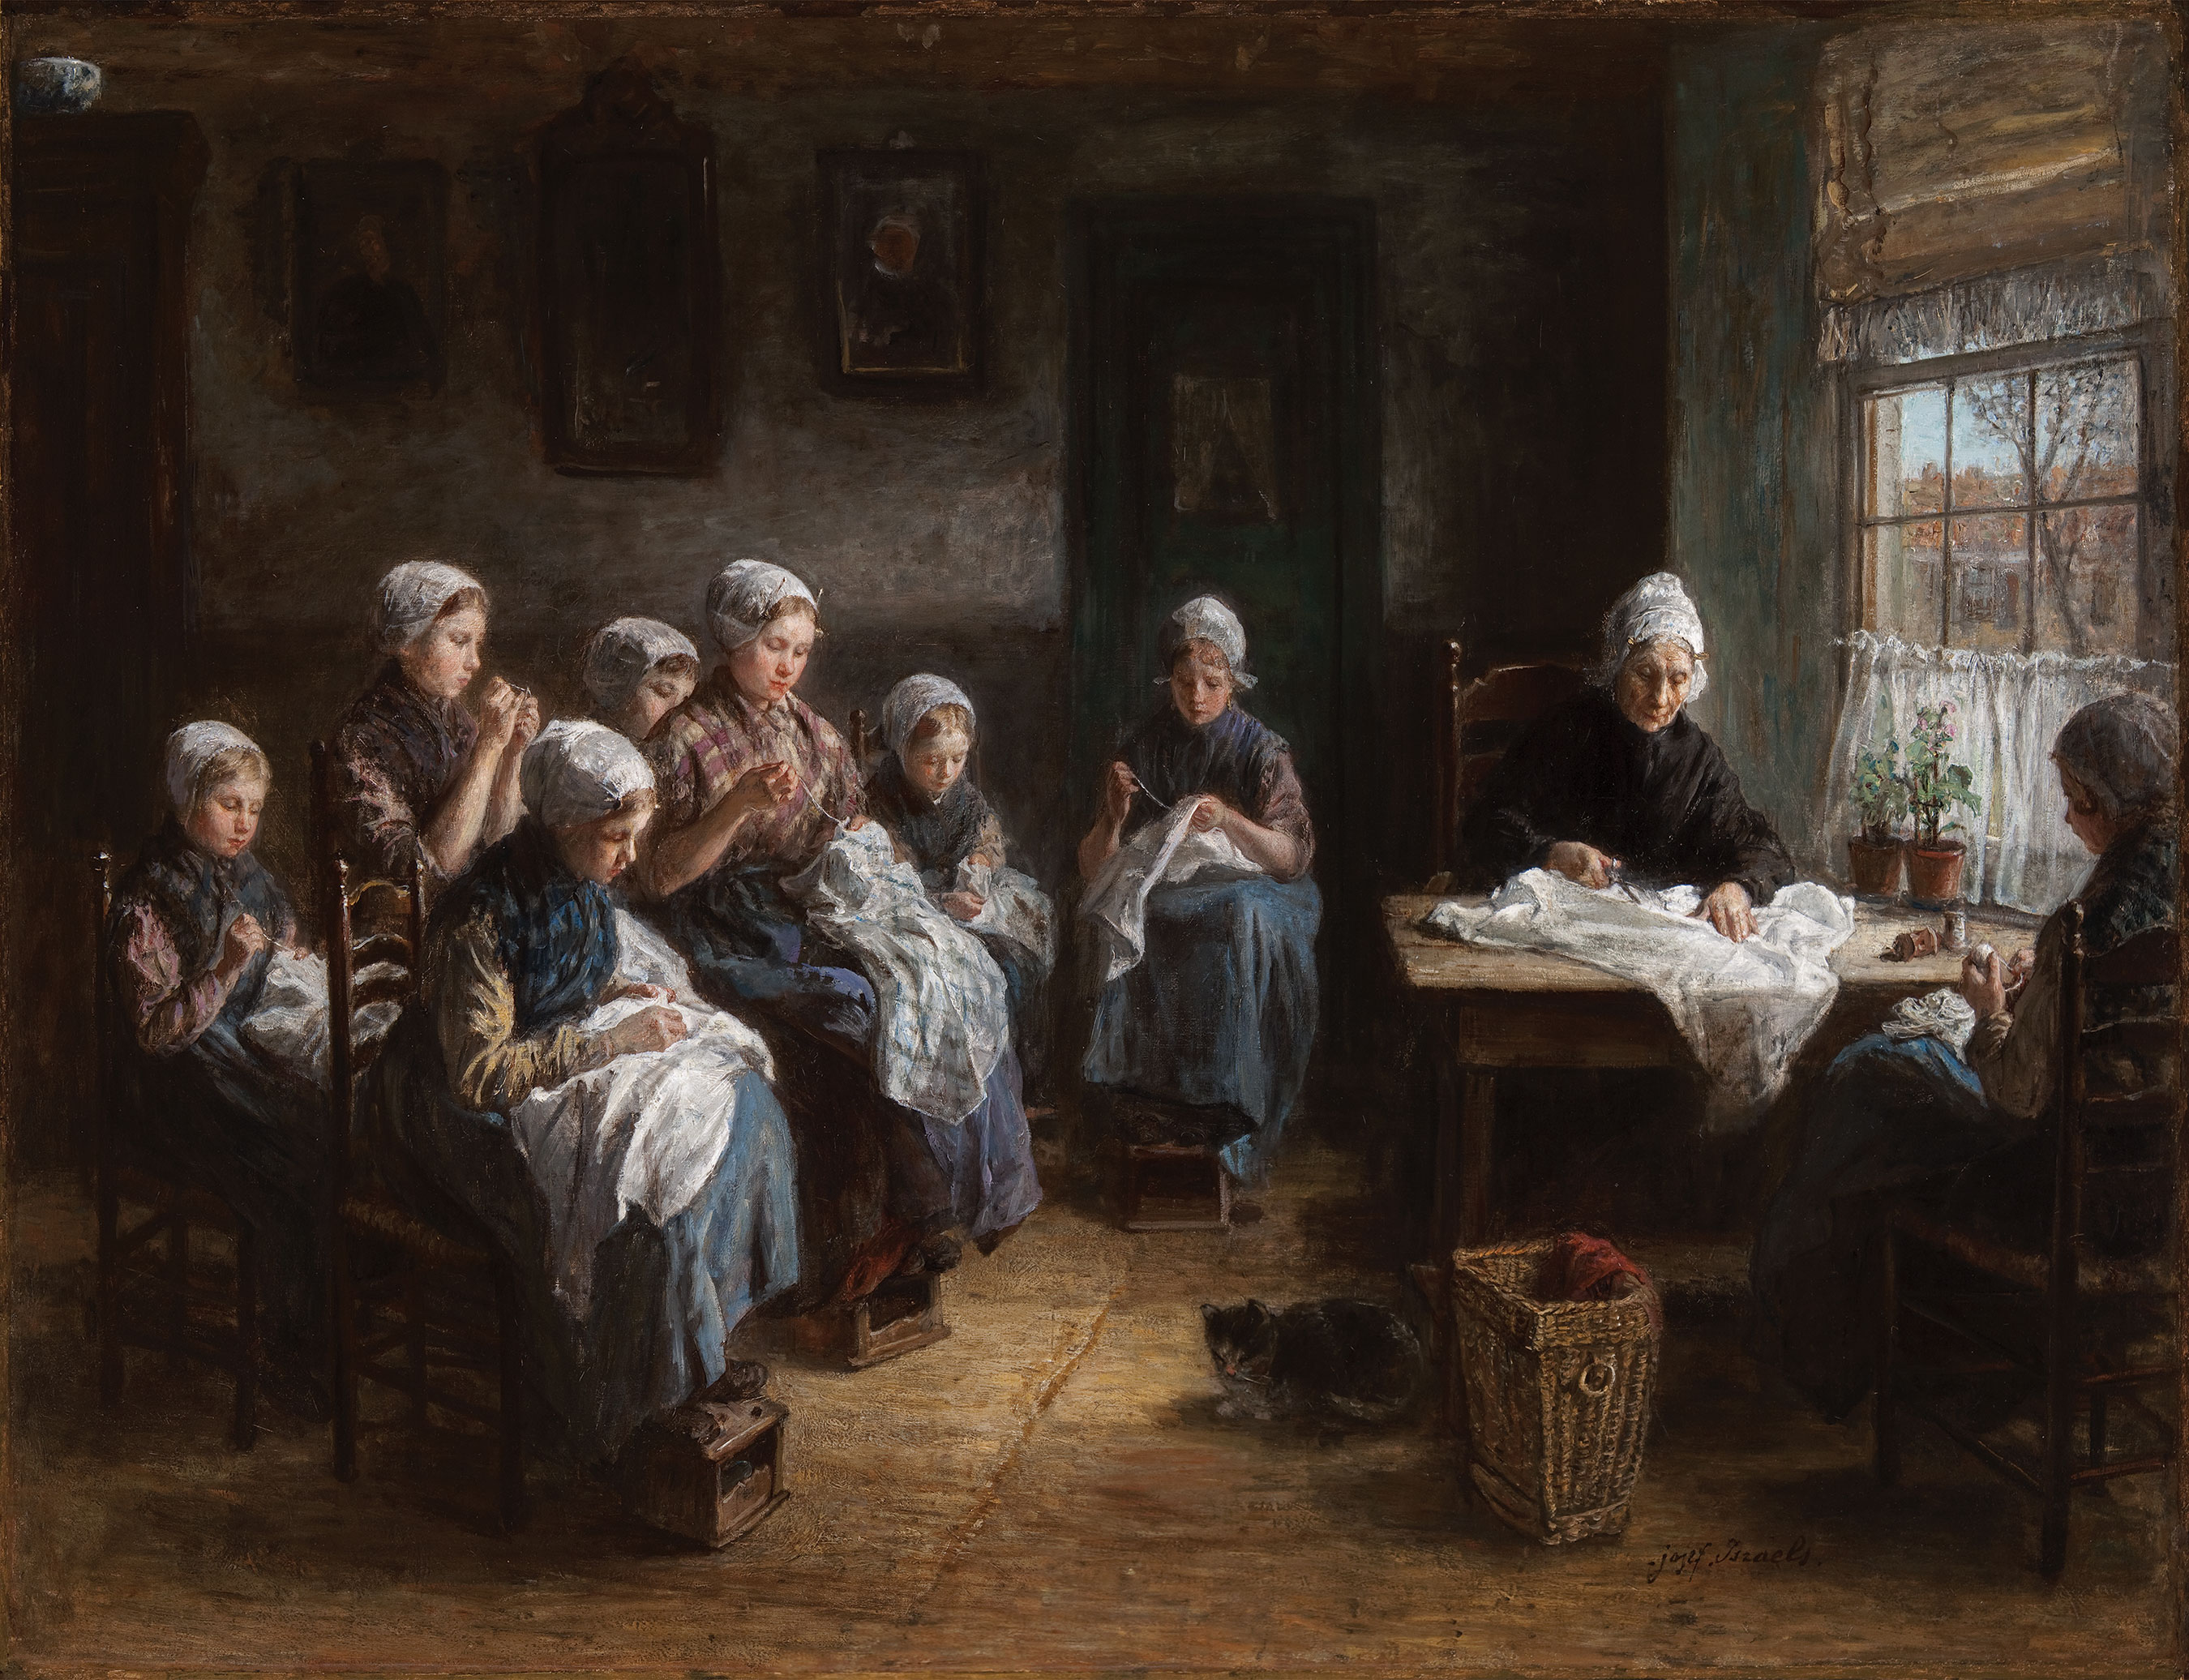 Jozef Israëls (Dutch, 1824–1911), Sewing School at Katwijk (detail), 1881, oil on canvas. Taft Museum of Art, Bequest of Charles Phelps Taft and Anna Sinton Taft, 1931.460